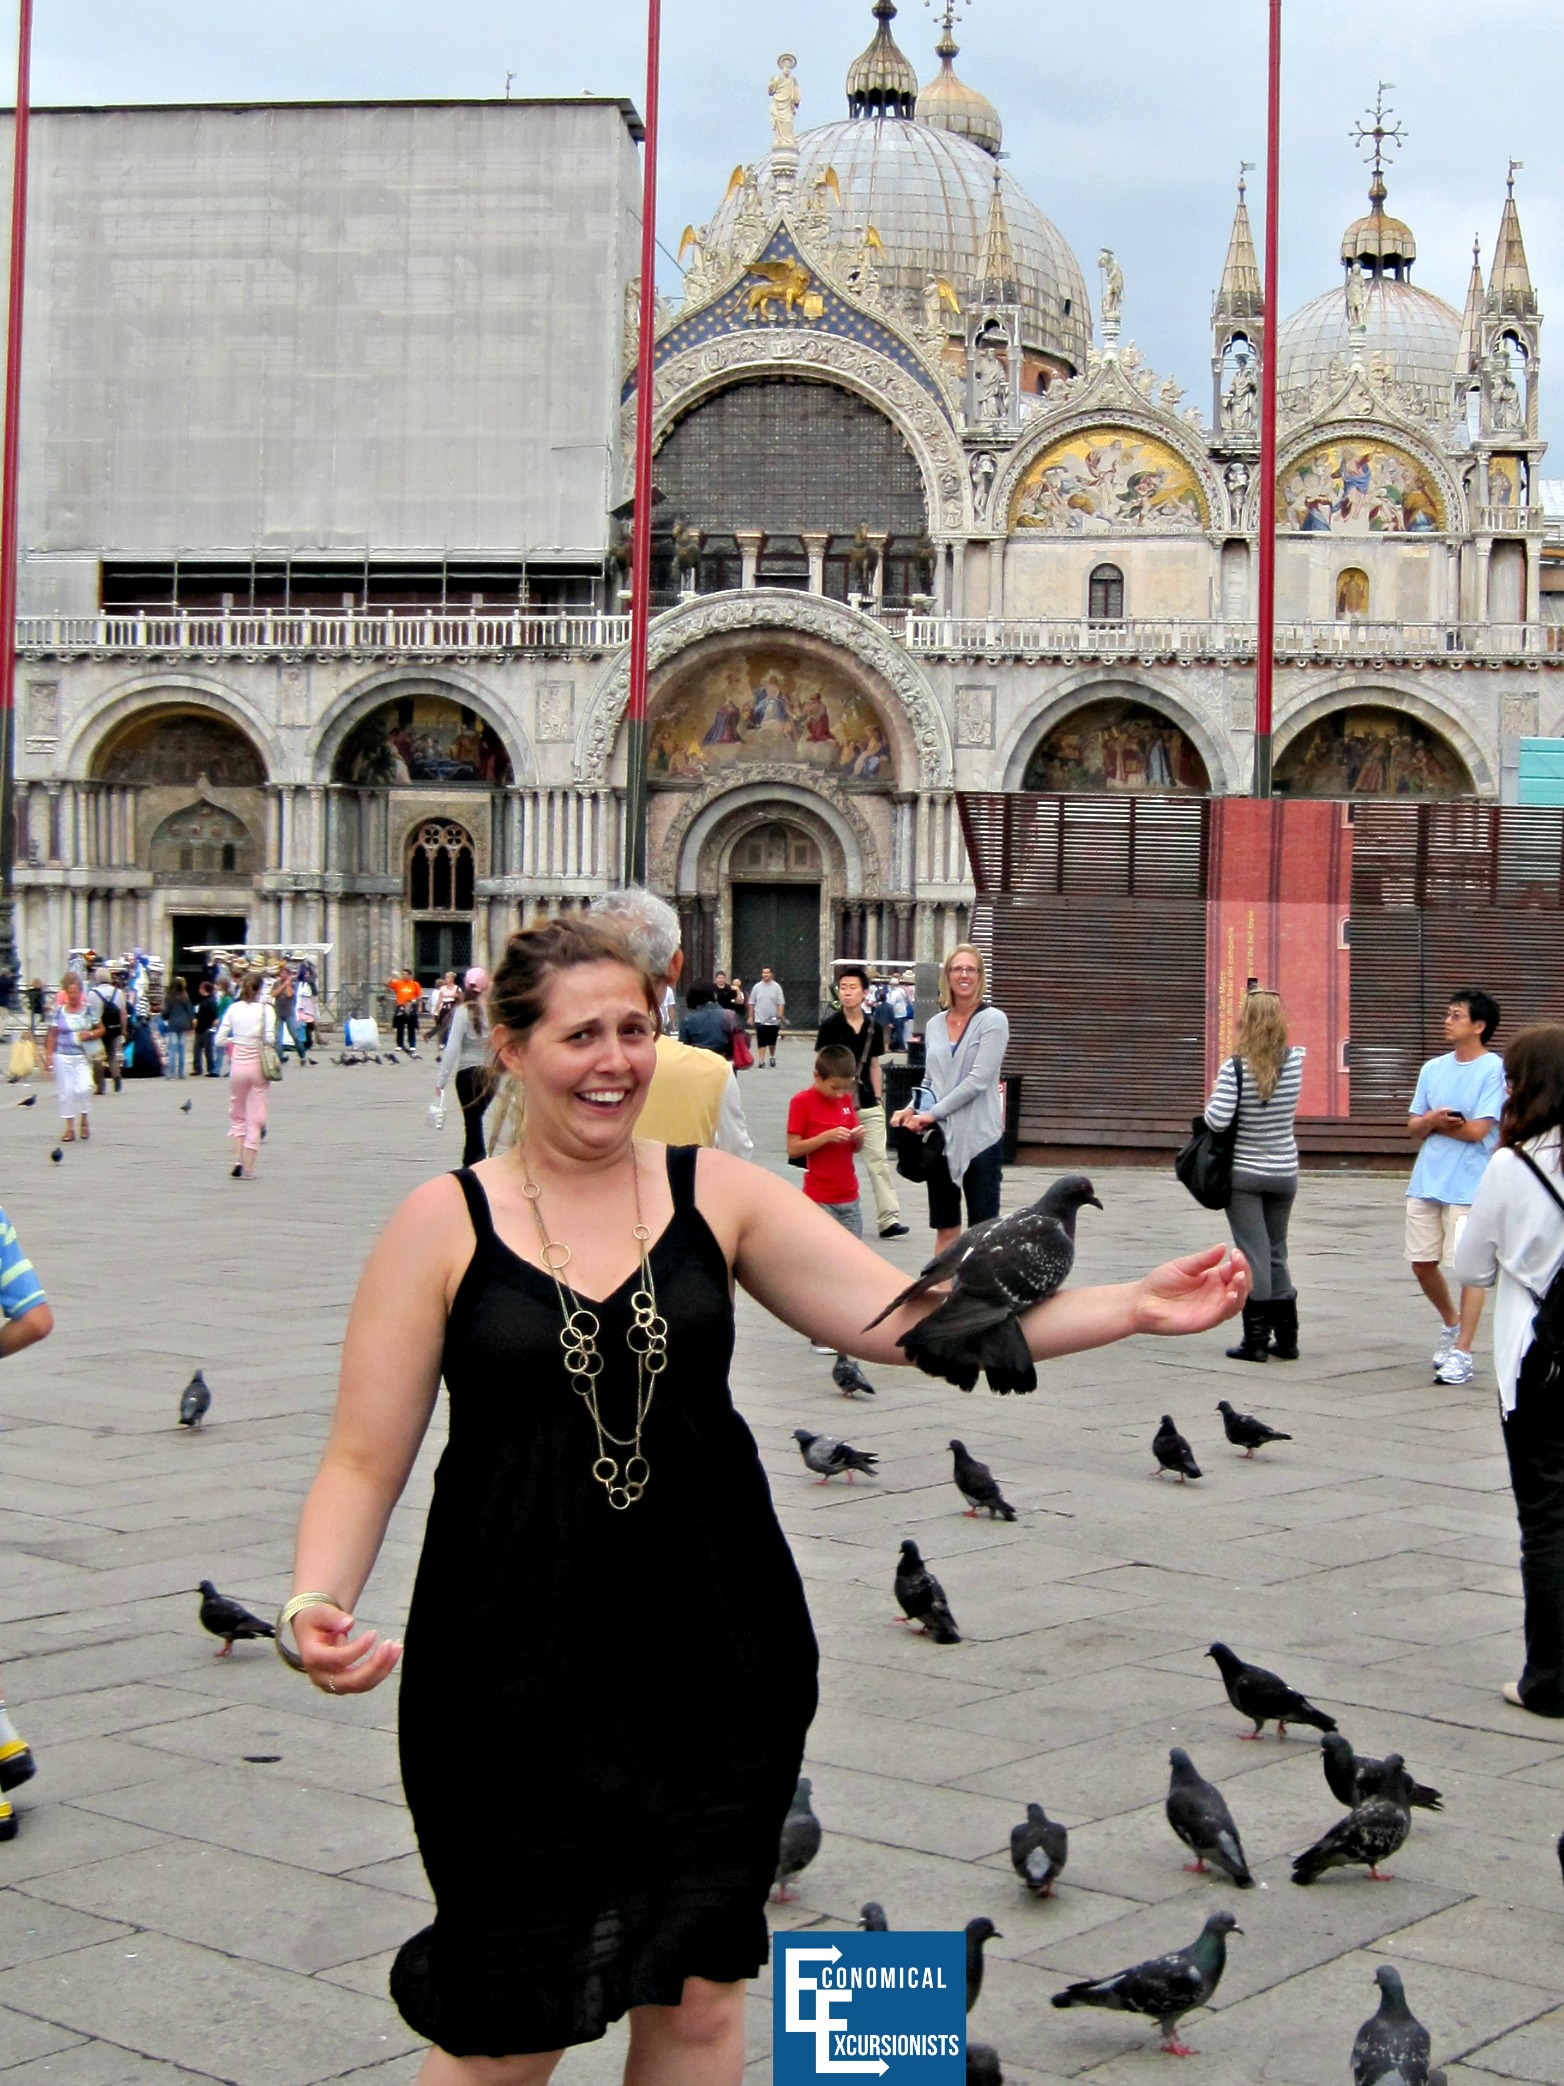 Just one of the many things you "HAVE" to do while in Venice: Feed the pigeons